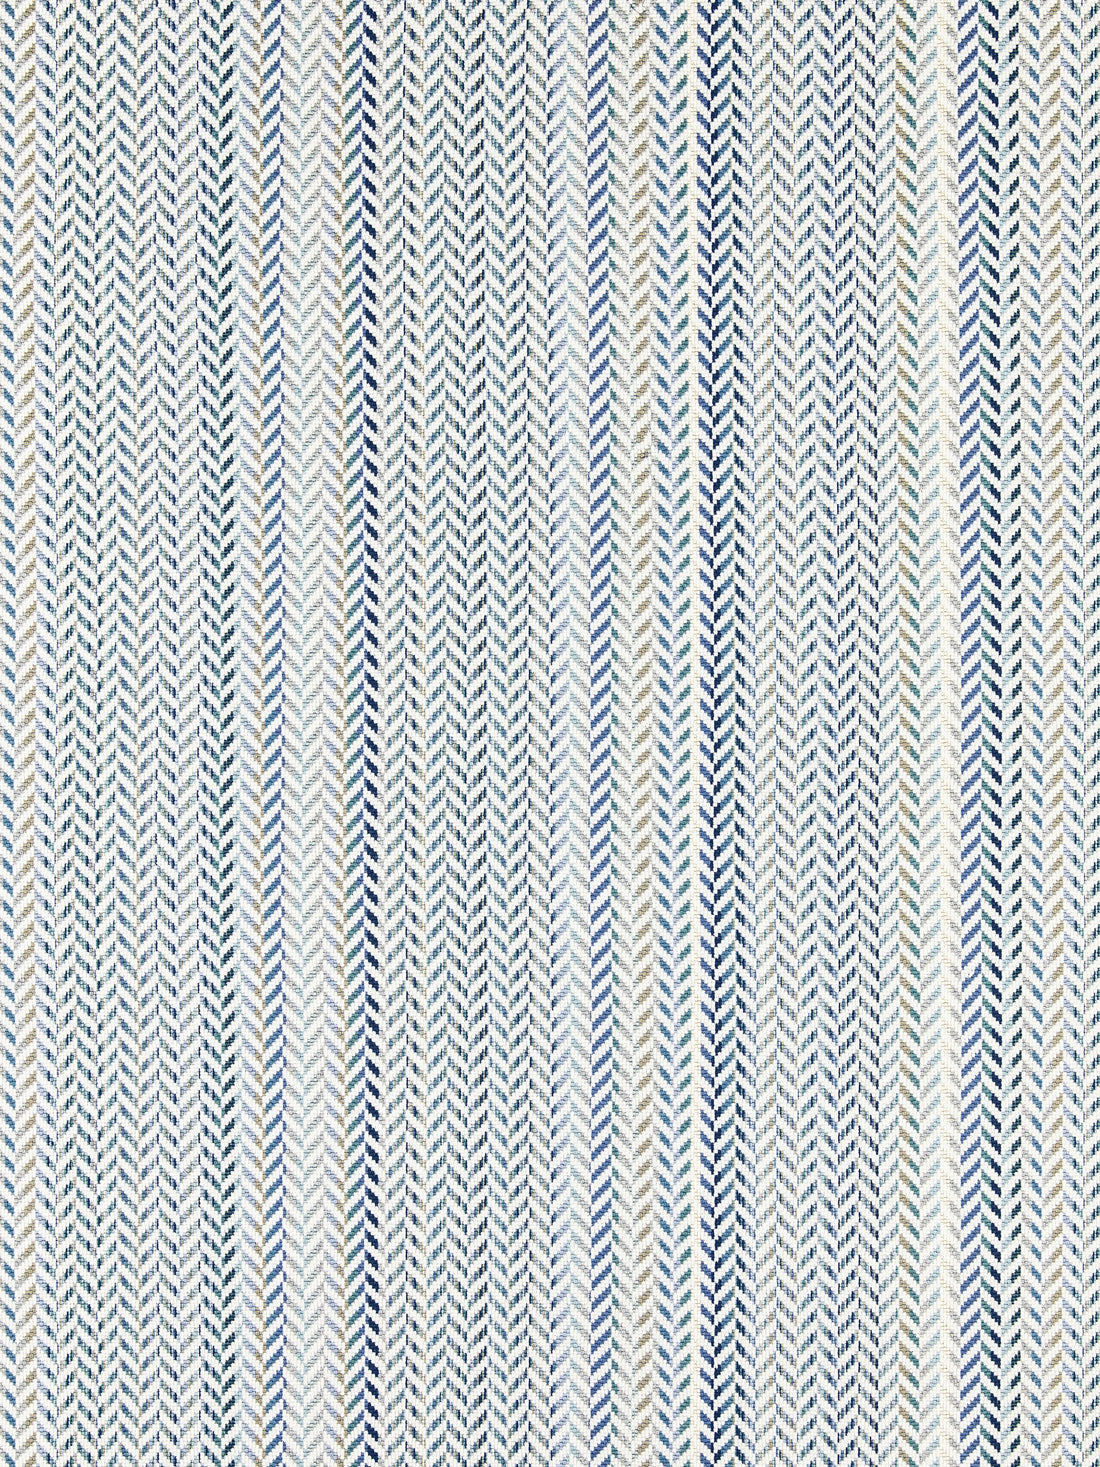 Arrow Stripe fabric in fountain color - pattern number SC 000227254 - by Scalamandre in the Scalamandre Fabrics Book 1 collection